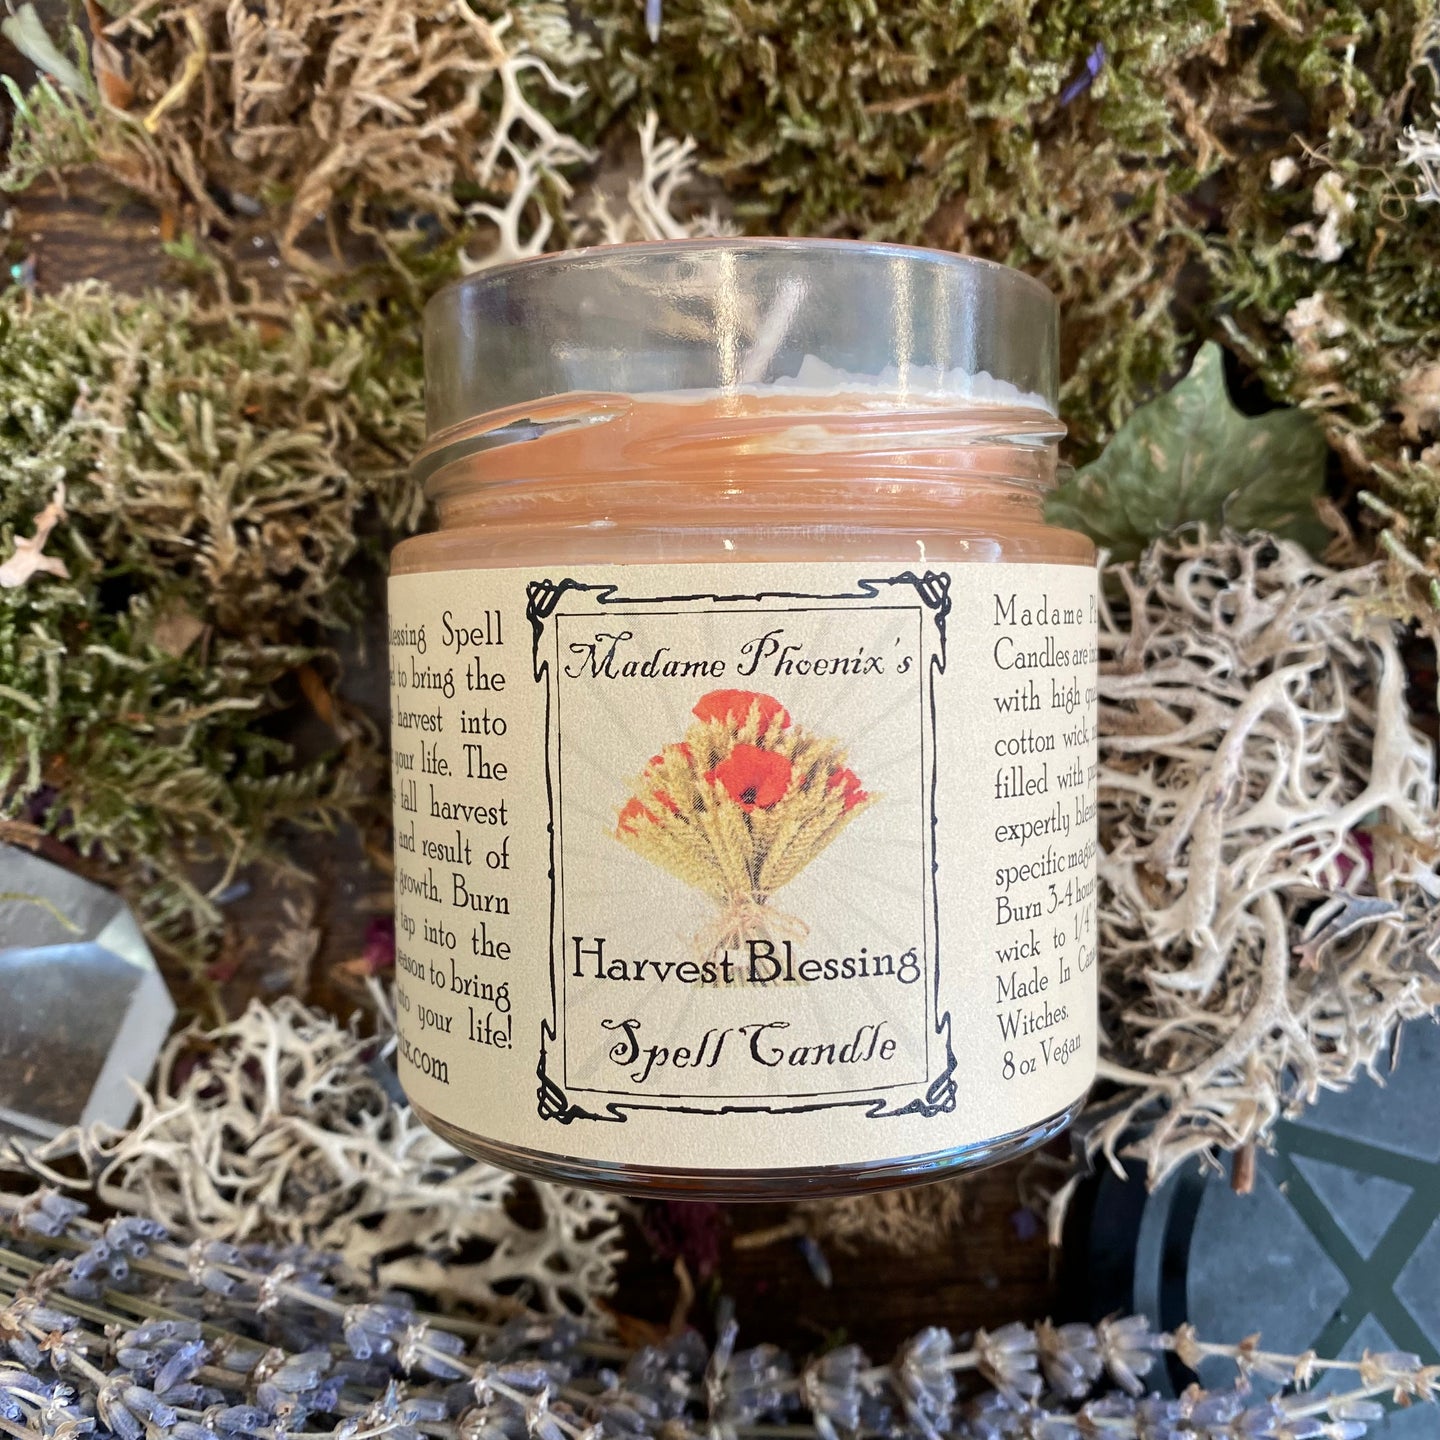 Harvest Blessing Fall Equinox Spell Candle